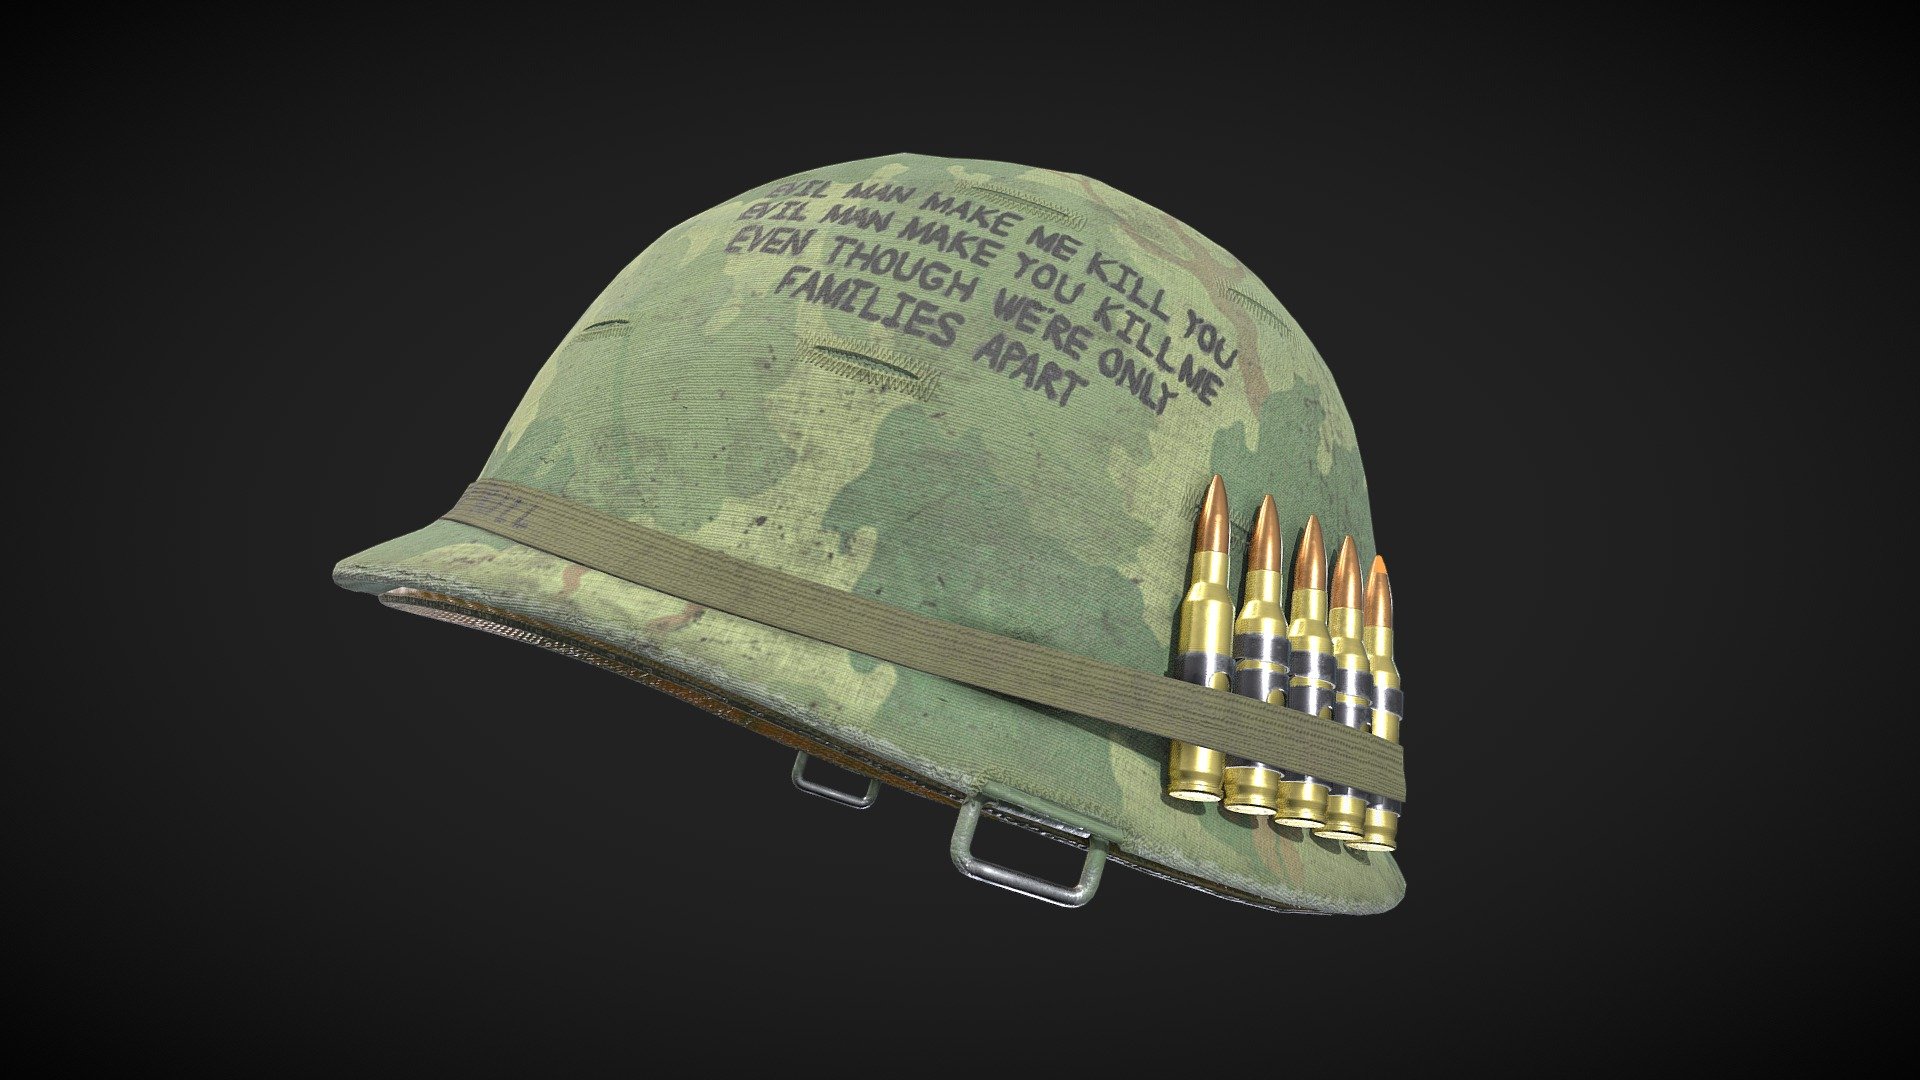 This project was created during my final class at Full Sail University. I was given a month to model, UV, and texture an asset, so I decided to make a Vietnam War M1 helmet with bottles and bullets stuck in the band 3d model